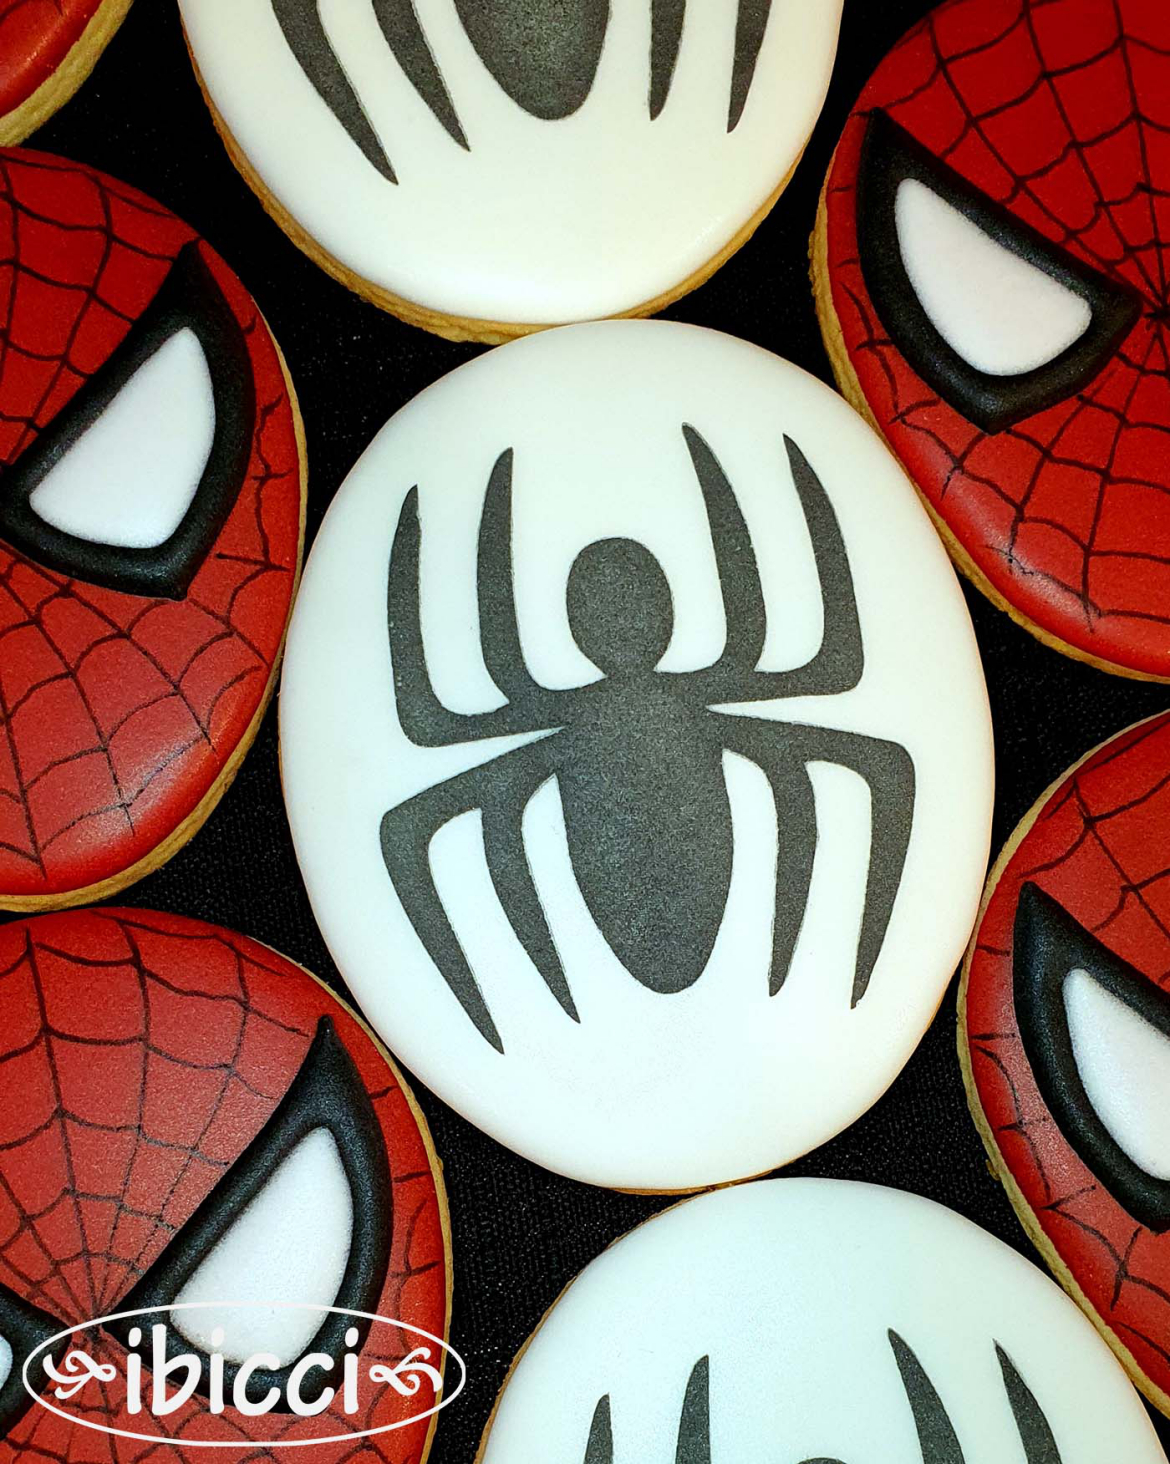 ibicci Spiderman cookies showing the Spiderman rounded logo spider stencil